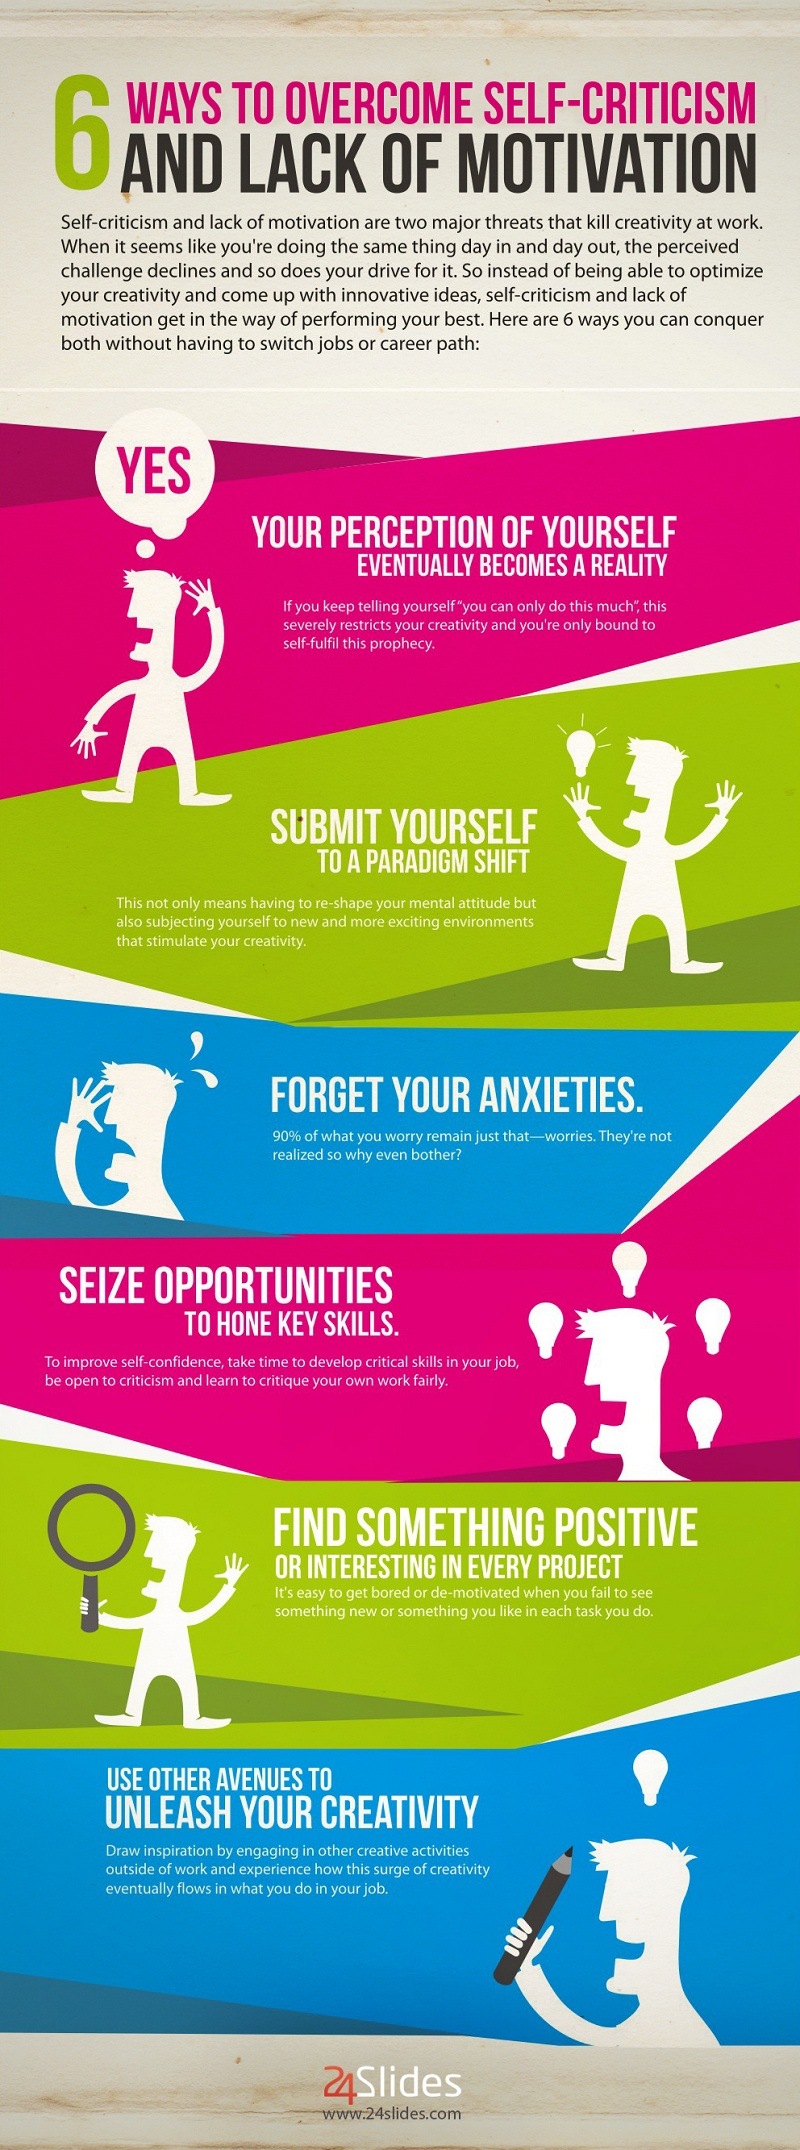 Overcoming-Self-Criticism-Guide-Infographic